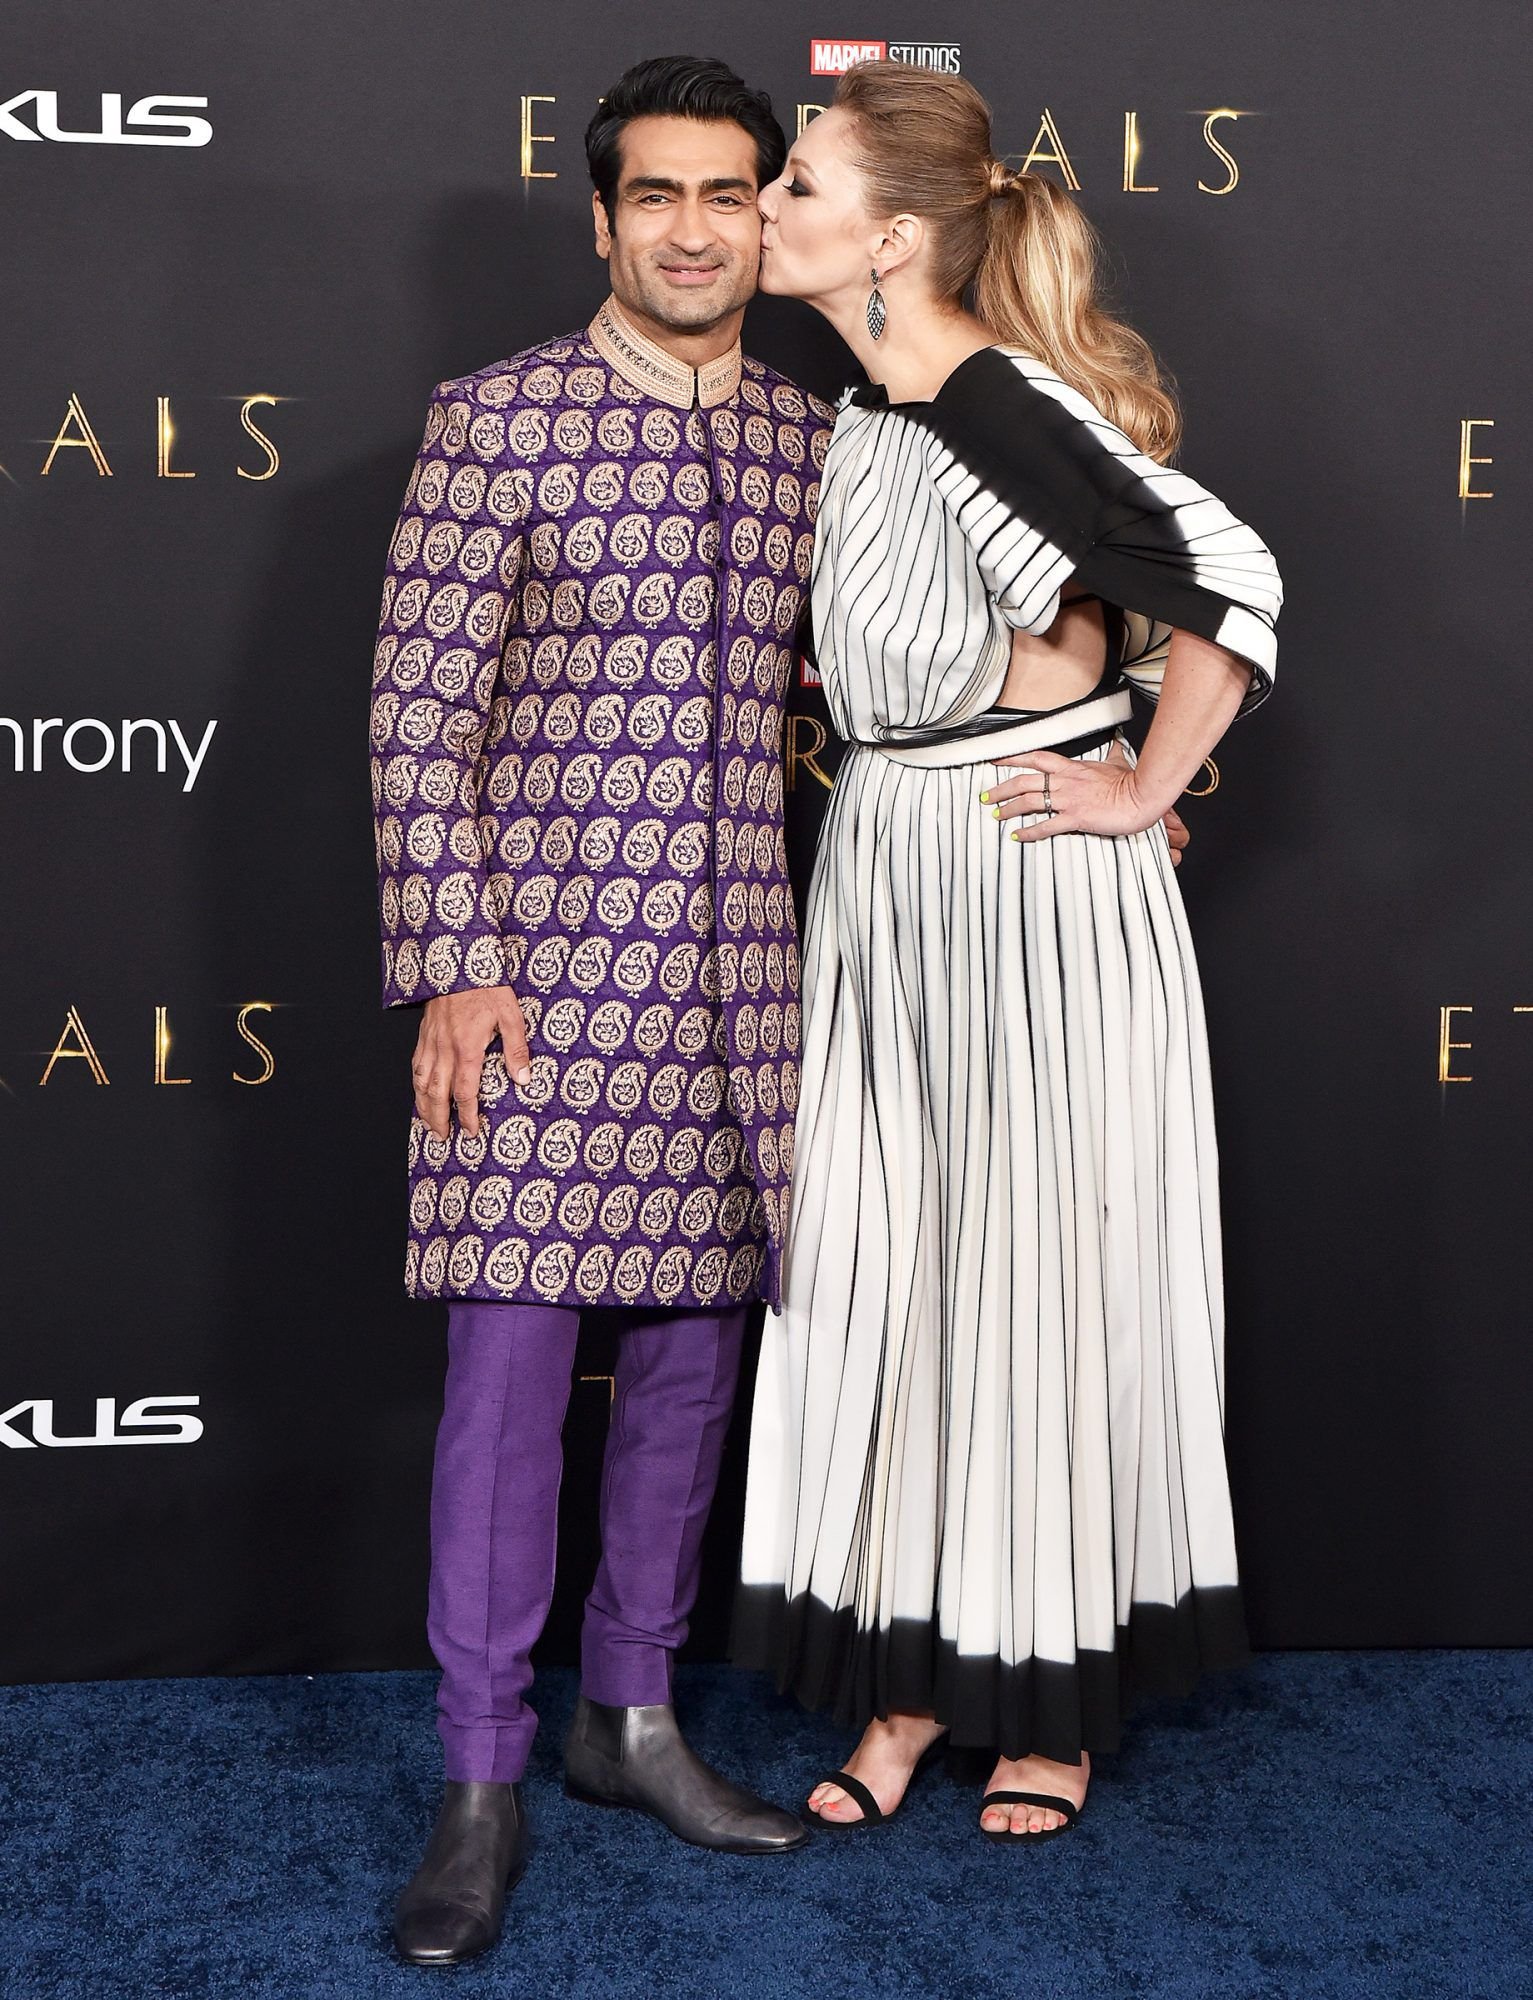 'Eternals' Premiere: All the Photos from the Star-Studded Red Carpet